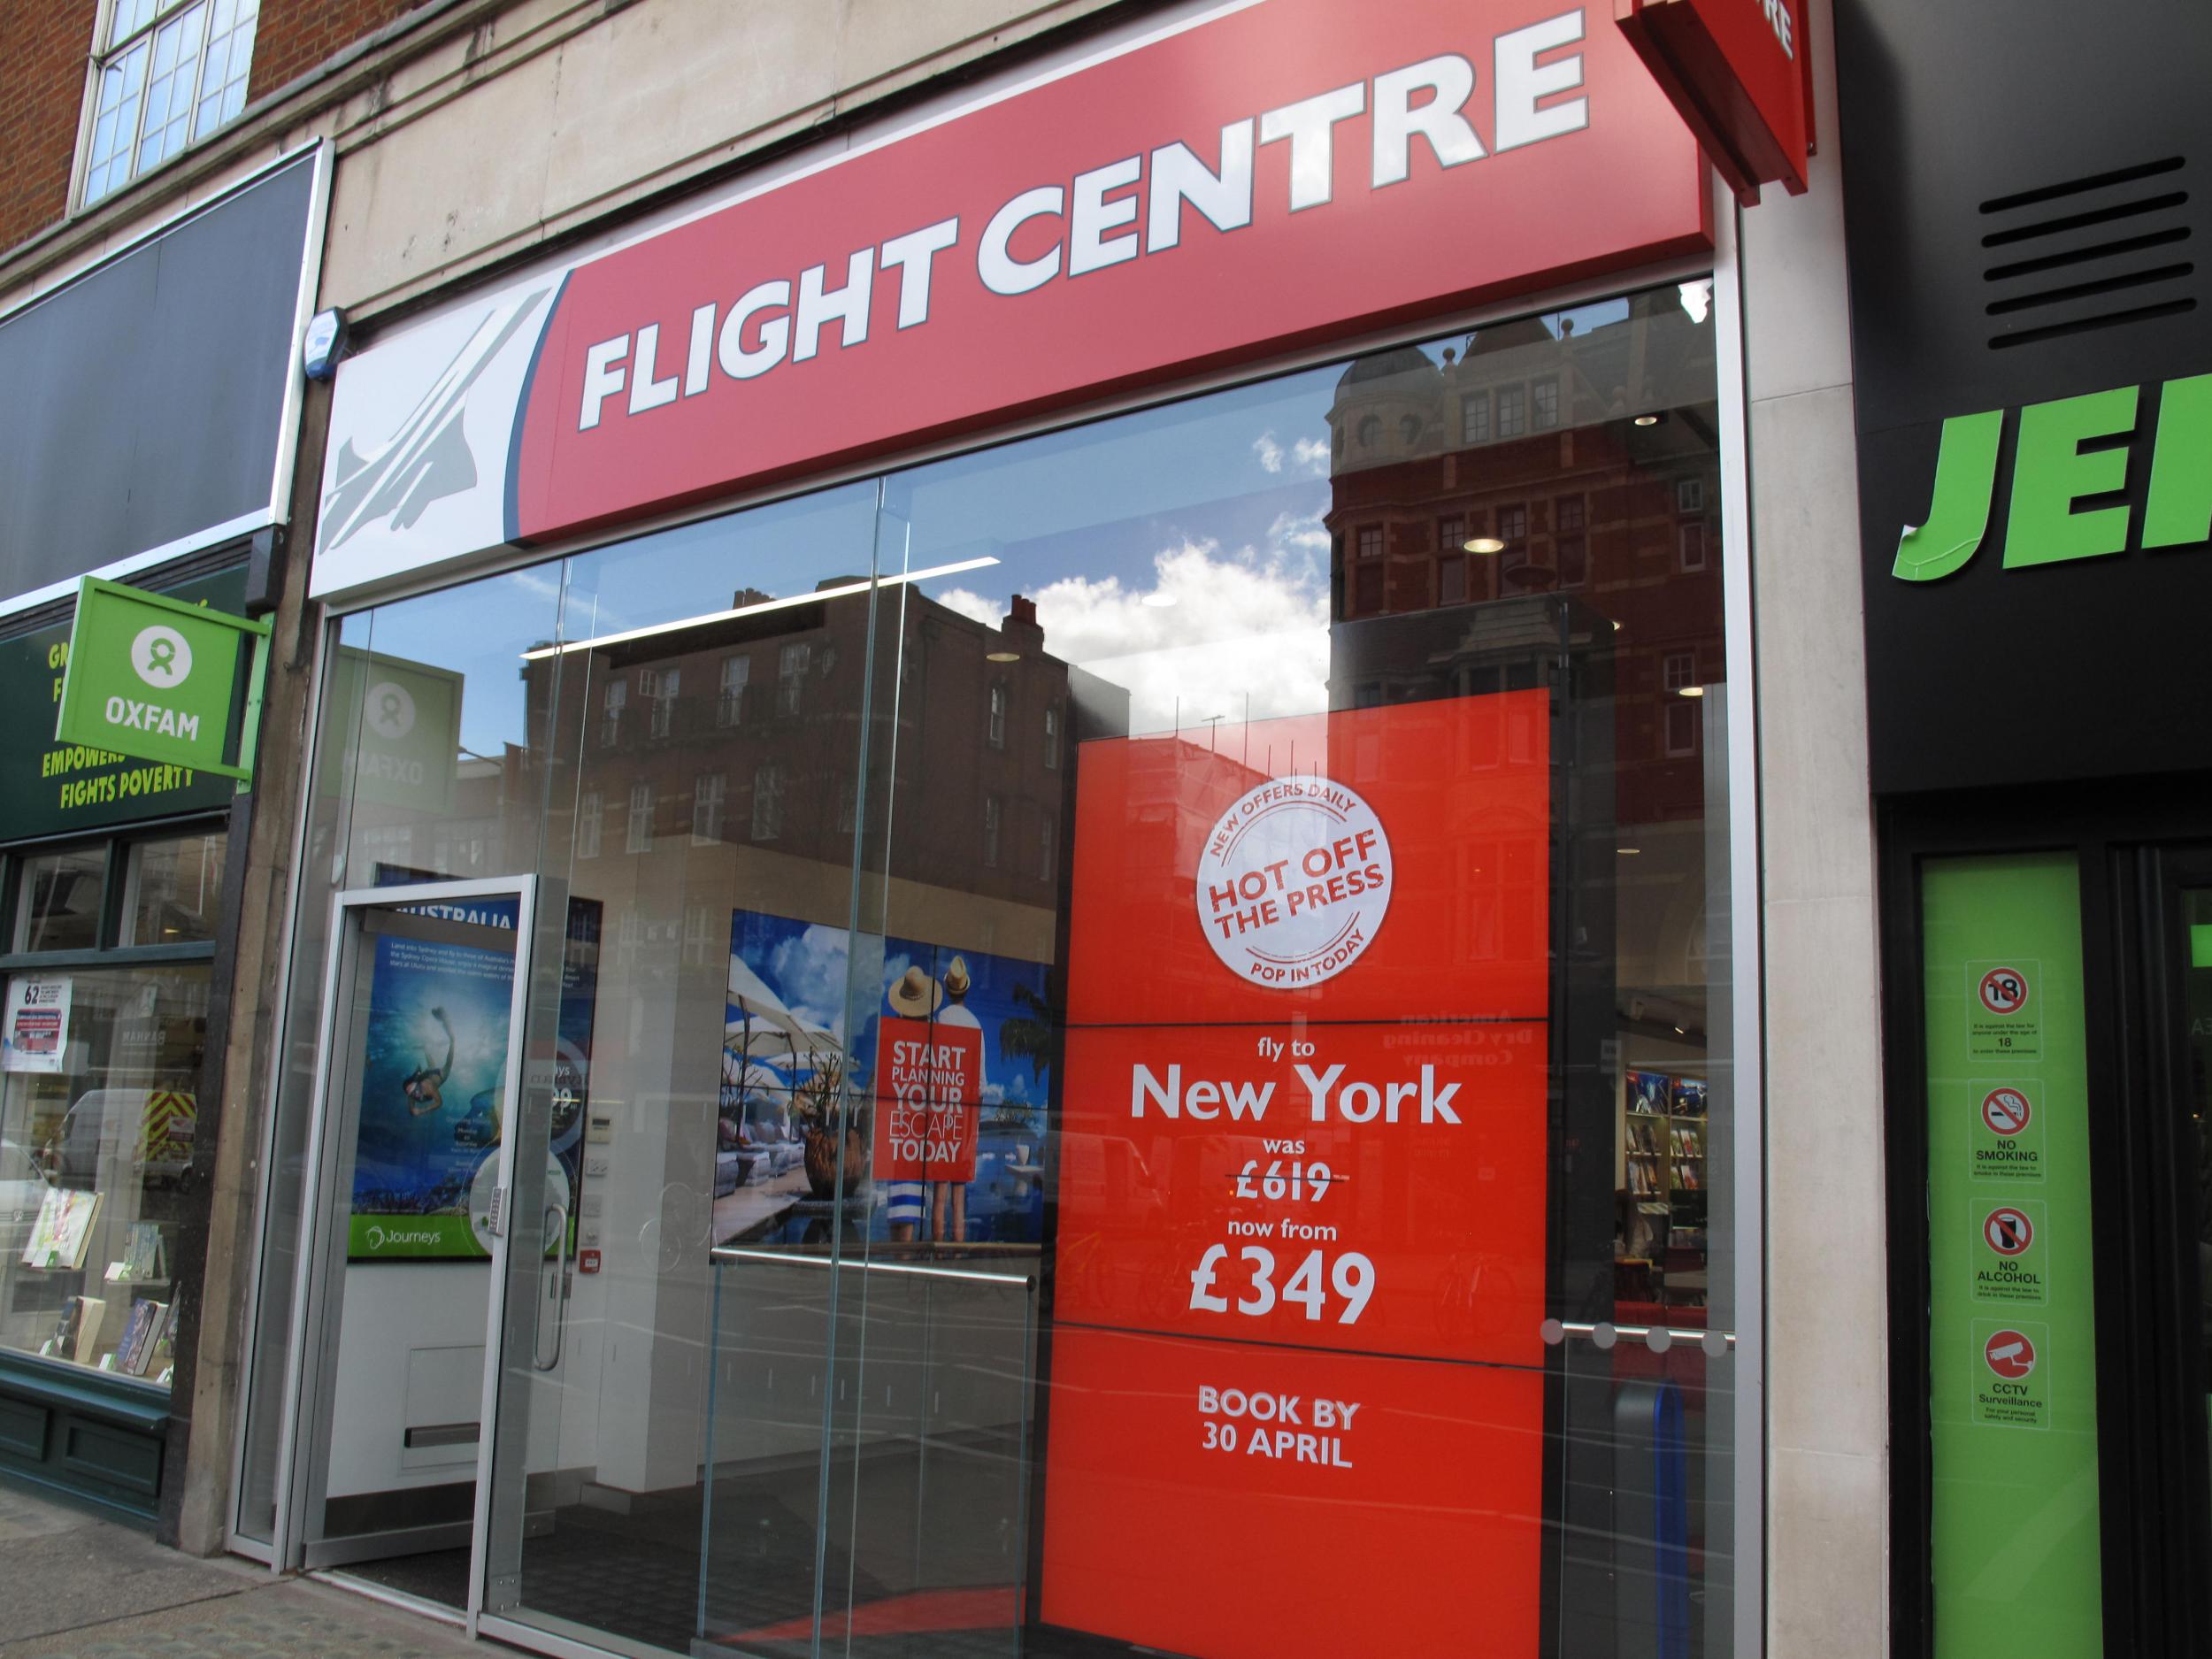 Flight Centre is at the centre of a storm about questionable practices